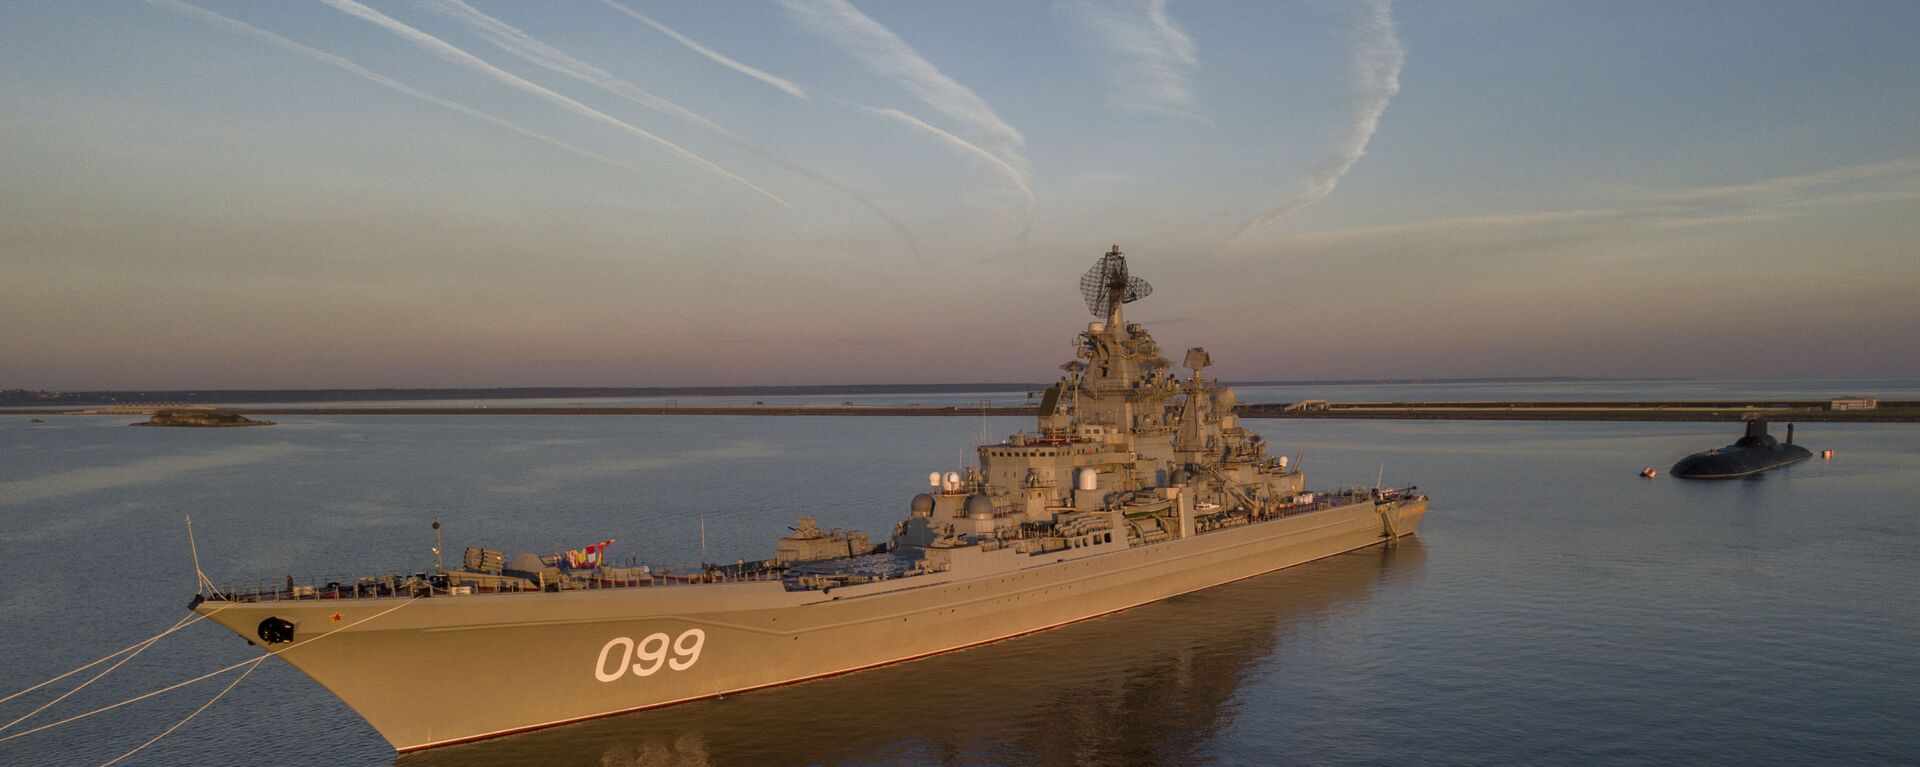 FILE - In this Saturday, July 29, 2017 file aerial photo, the Russian nuclear-powered cruiser Pyotr Veliky (Peter the Great) and the Russian nuclear submarine Dmitry Donskoy moored near Kronstadt, a seaport town 30 km (19 miles) west of St. Petersburg, Russia - Sputnik International, 1920, 12.07.2021